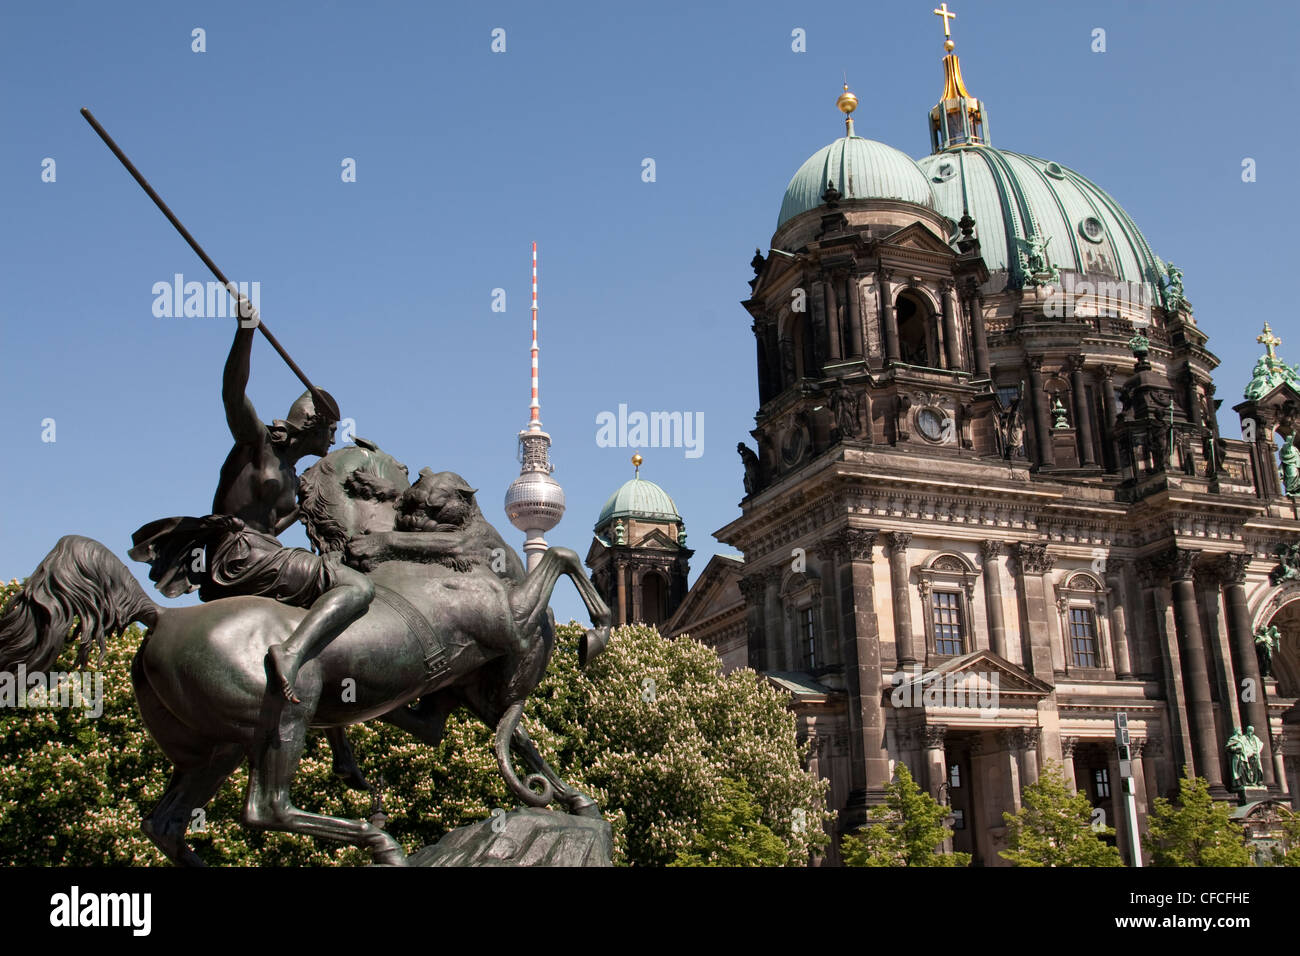 Statue of Amazon on horseback fighting a Lion sculpture in front of the Berlin Cathedral Stock Photo